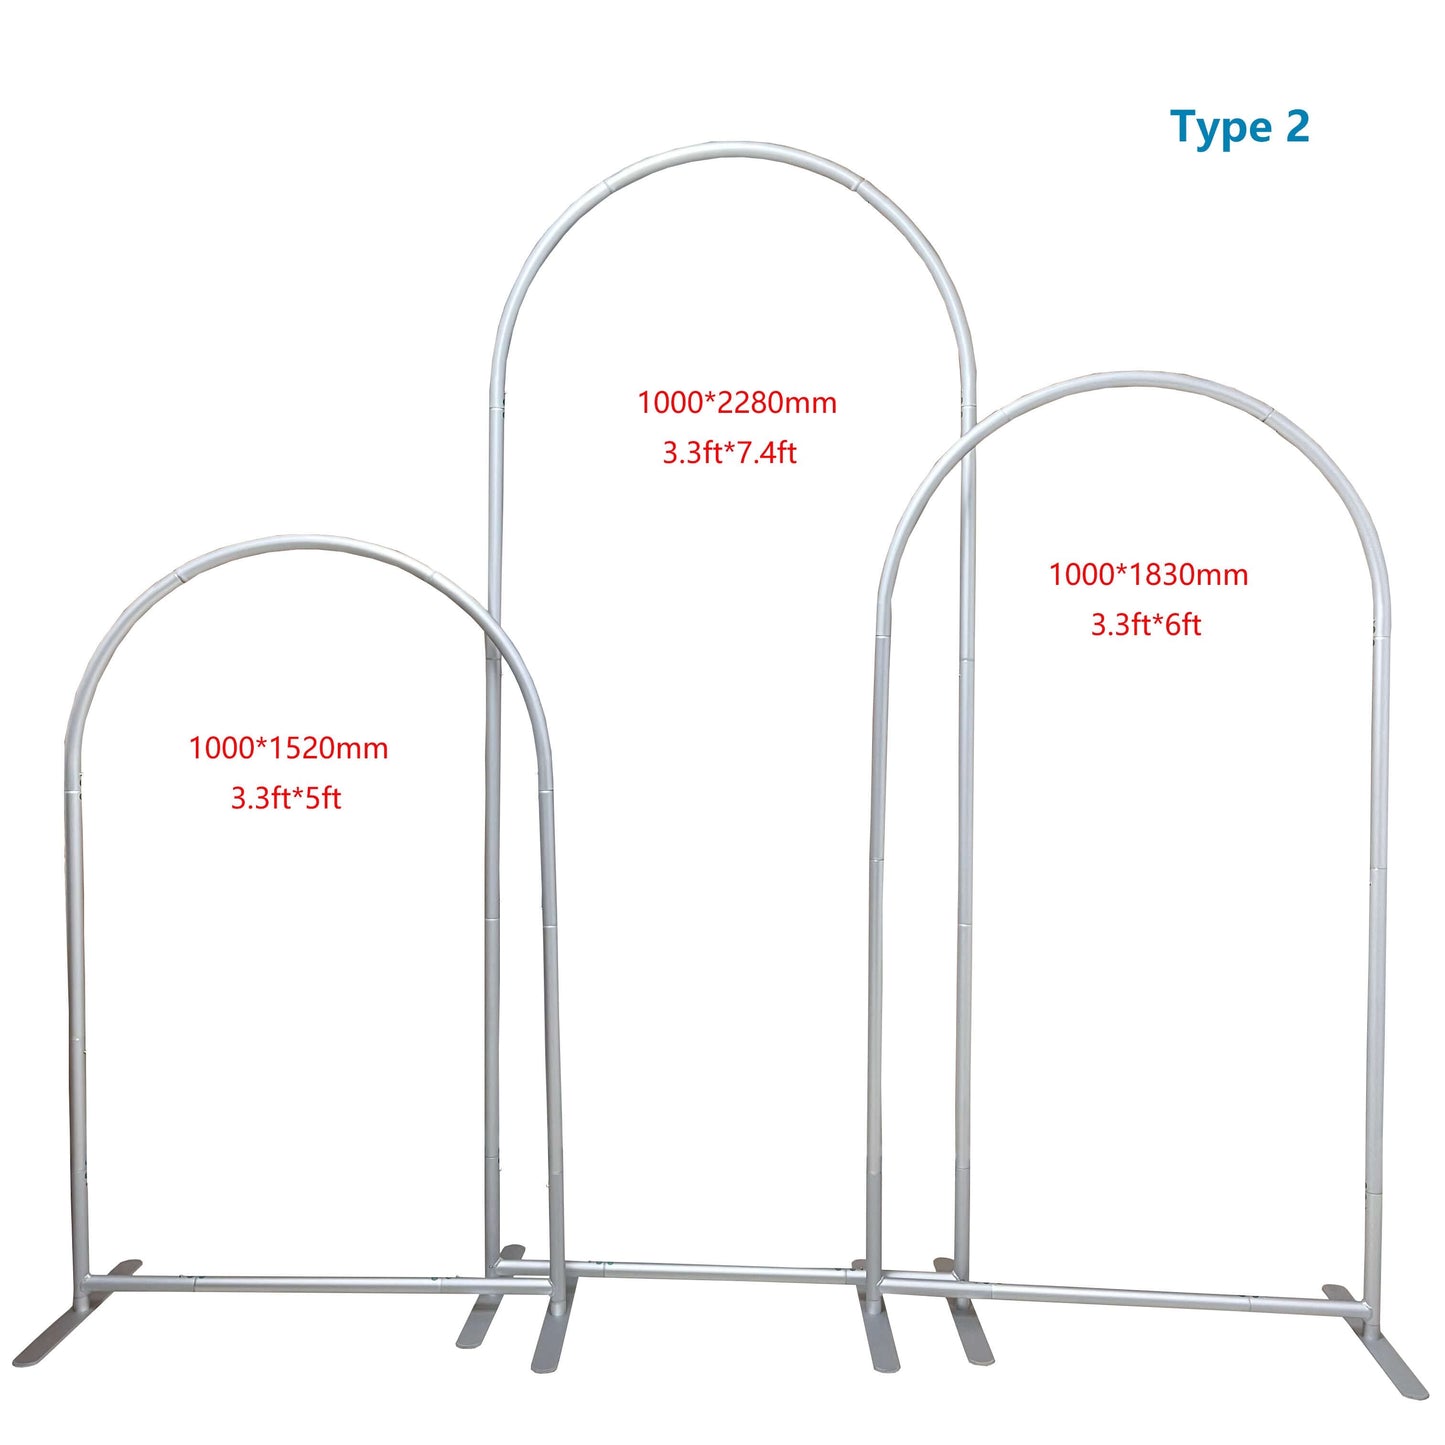 Chiara Arch Stand Frames 5X7Ft Open 3X4Ft 4X7Ft 3.3X5Ft+3.3X7.4Ft+3.3X6Ft Stands Party Backdrop